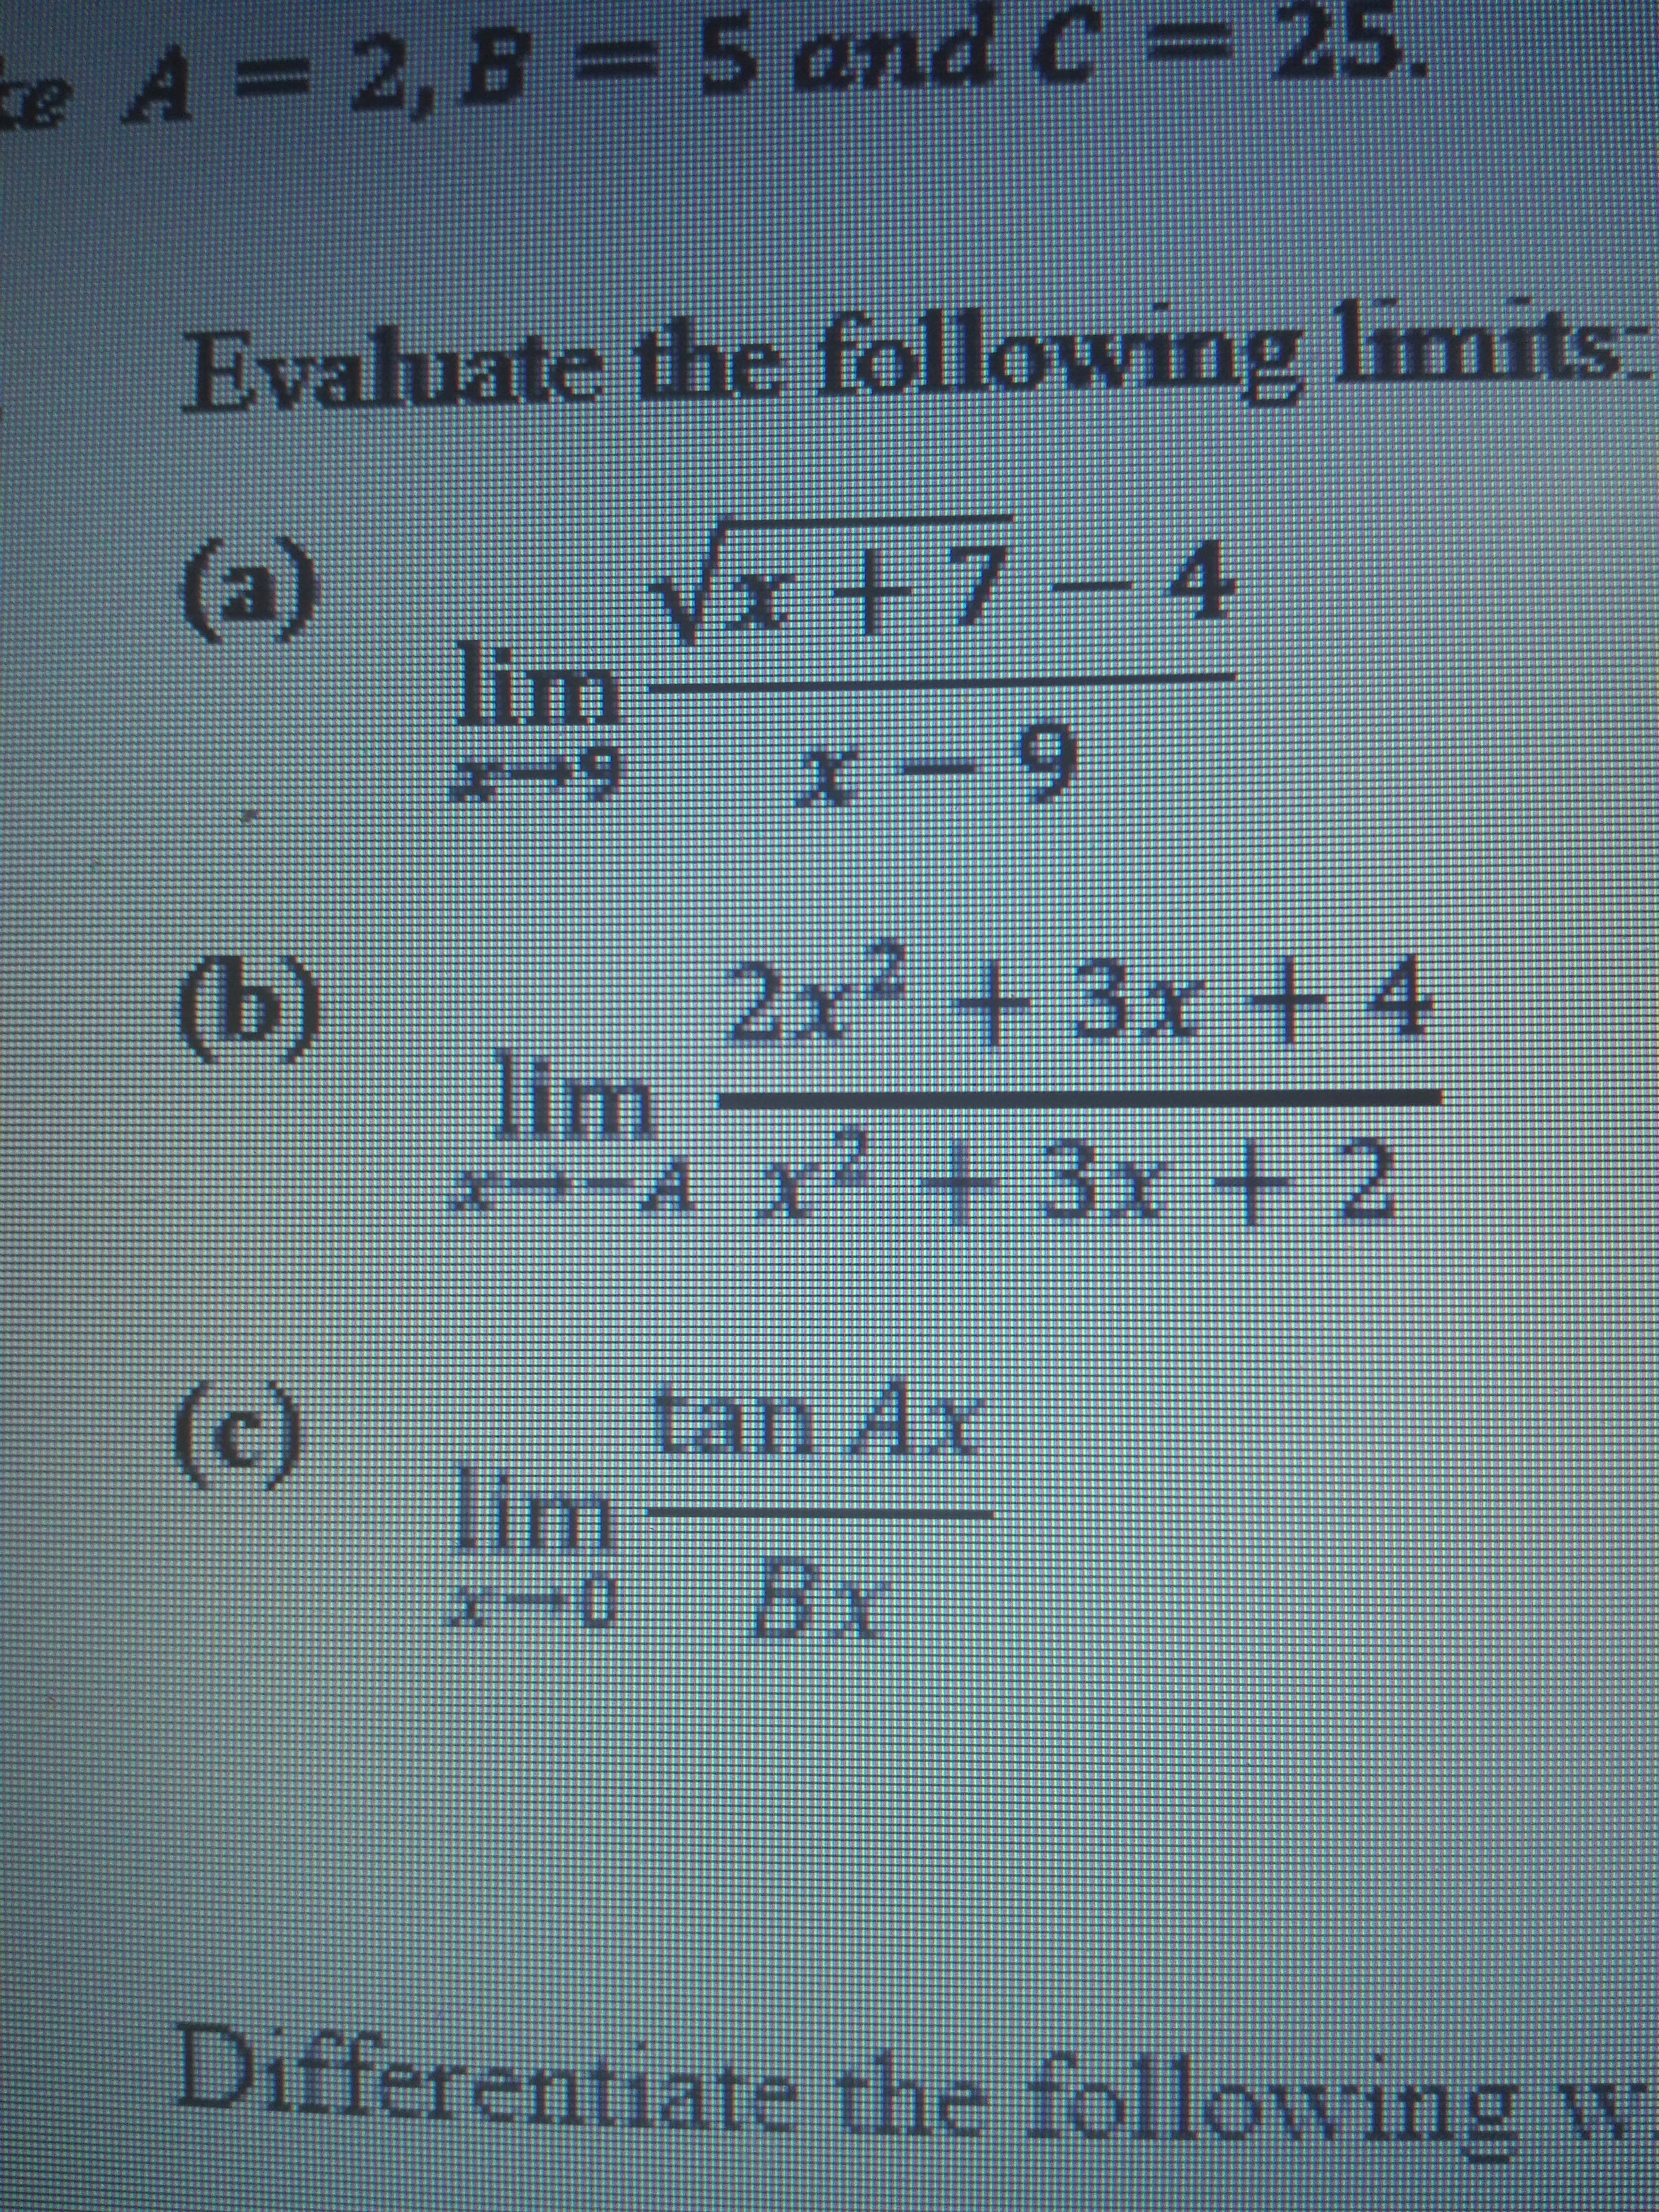 Evaluate the following limits
